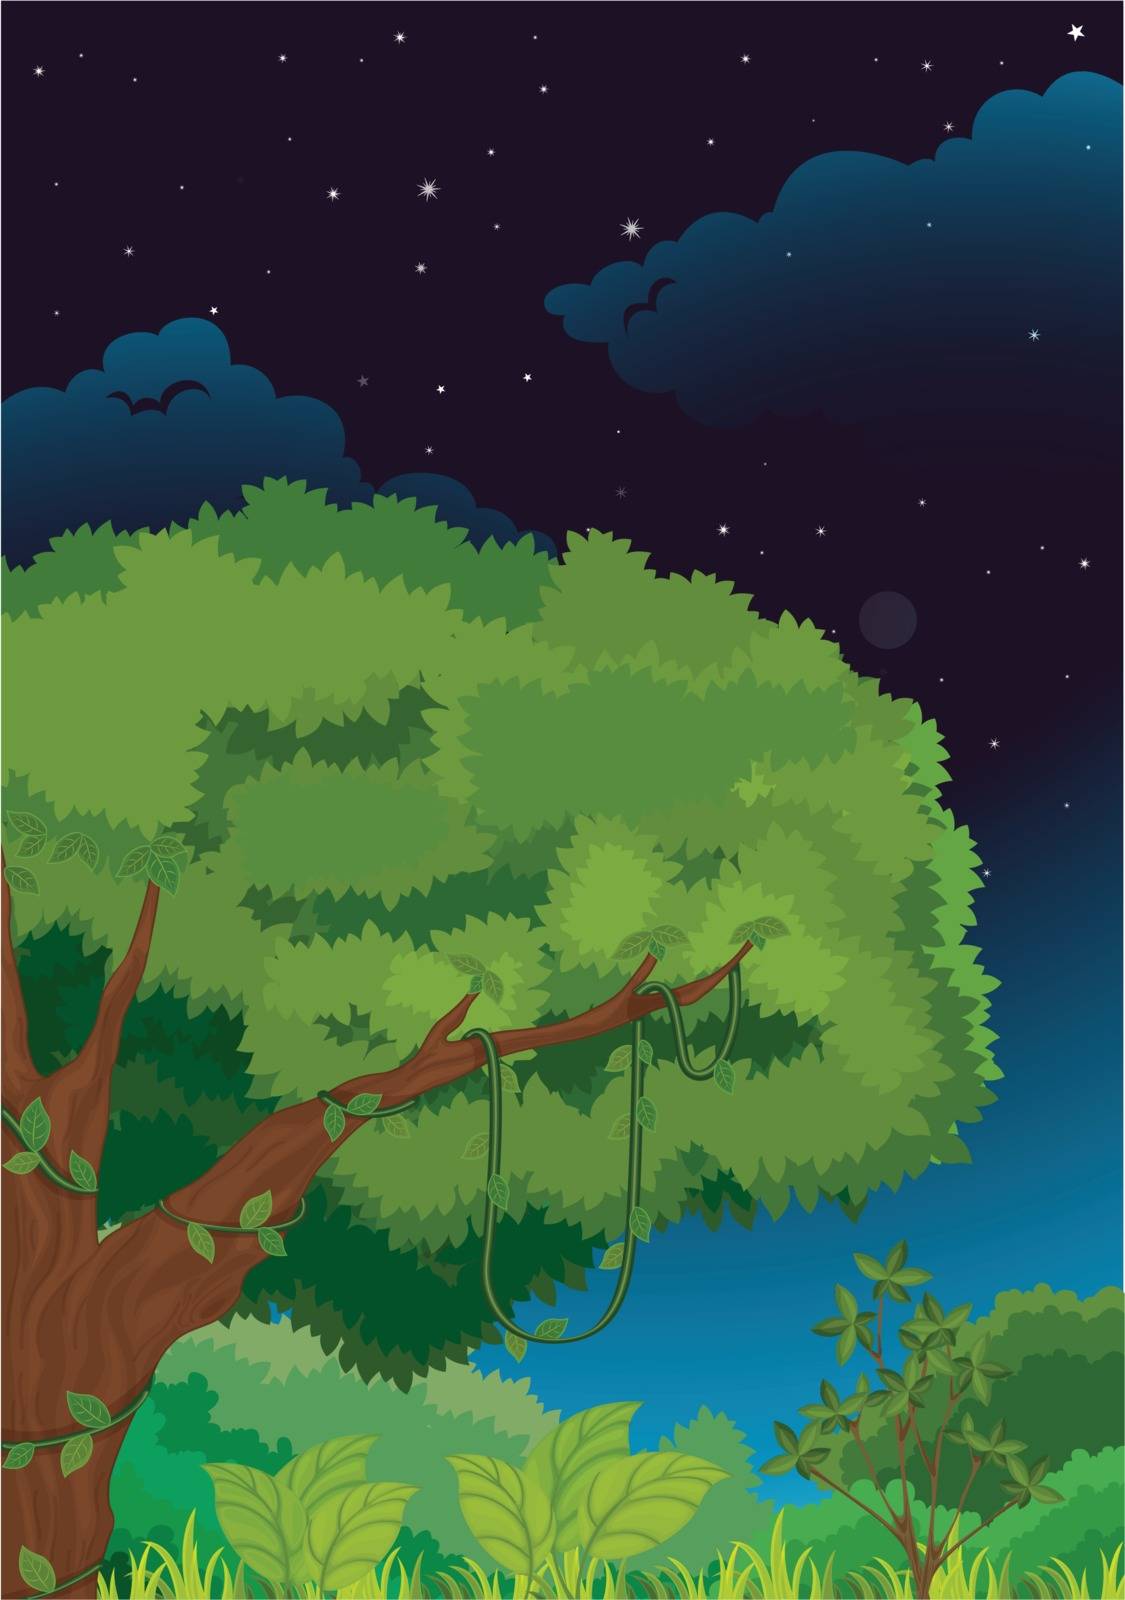 Illustration of a nature background at night